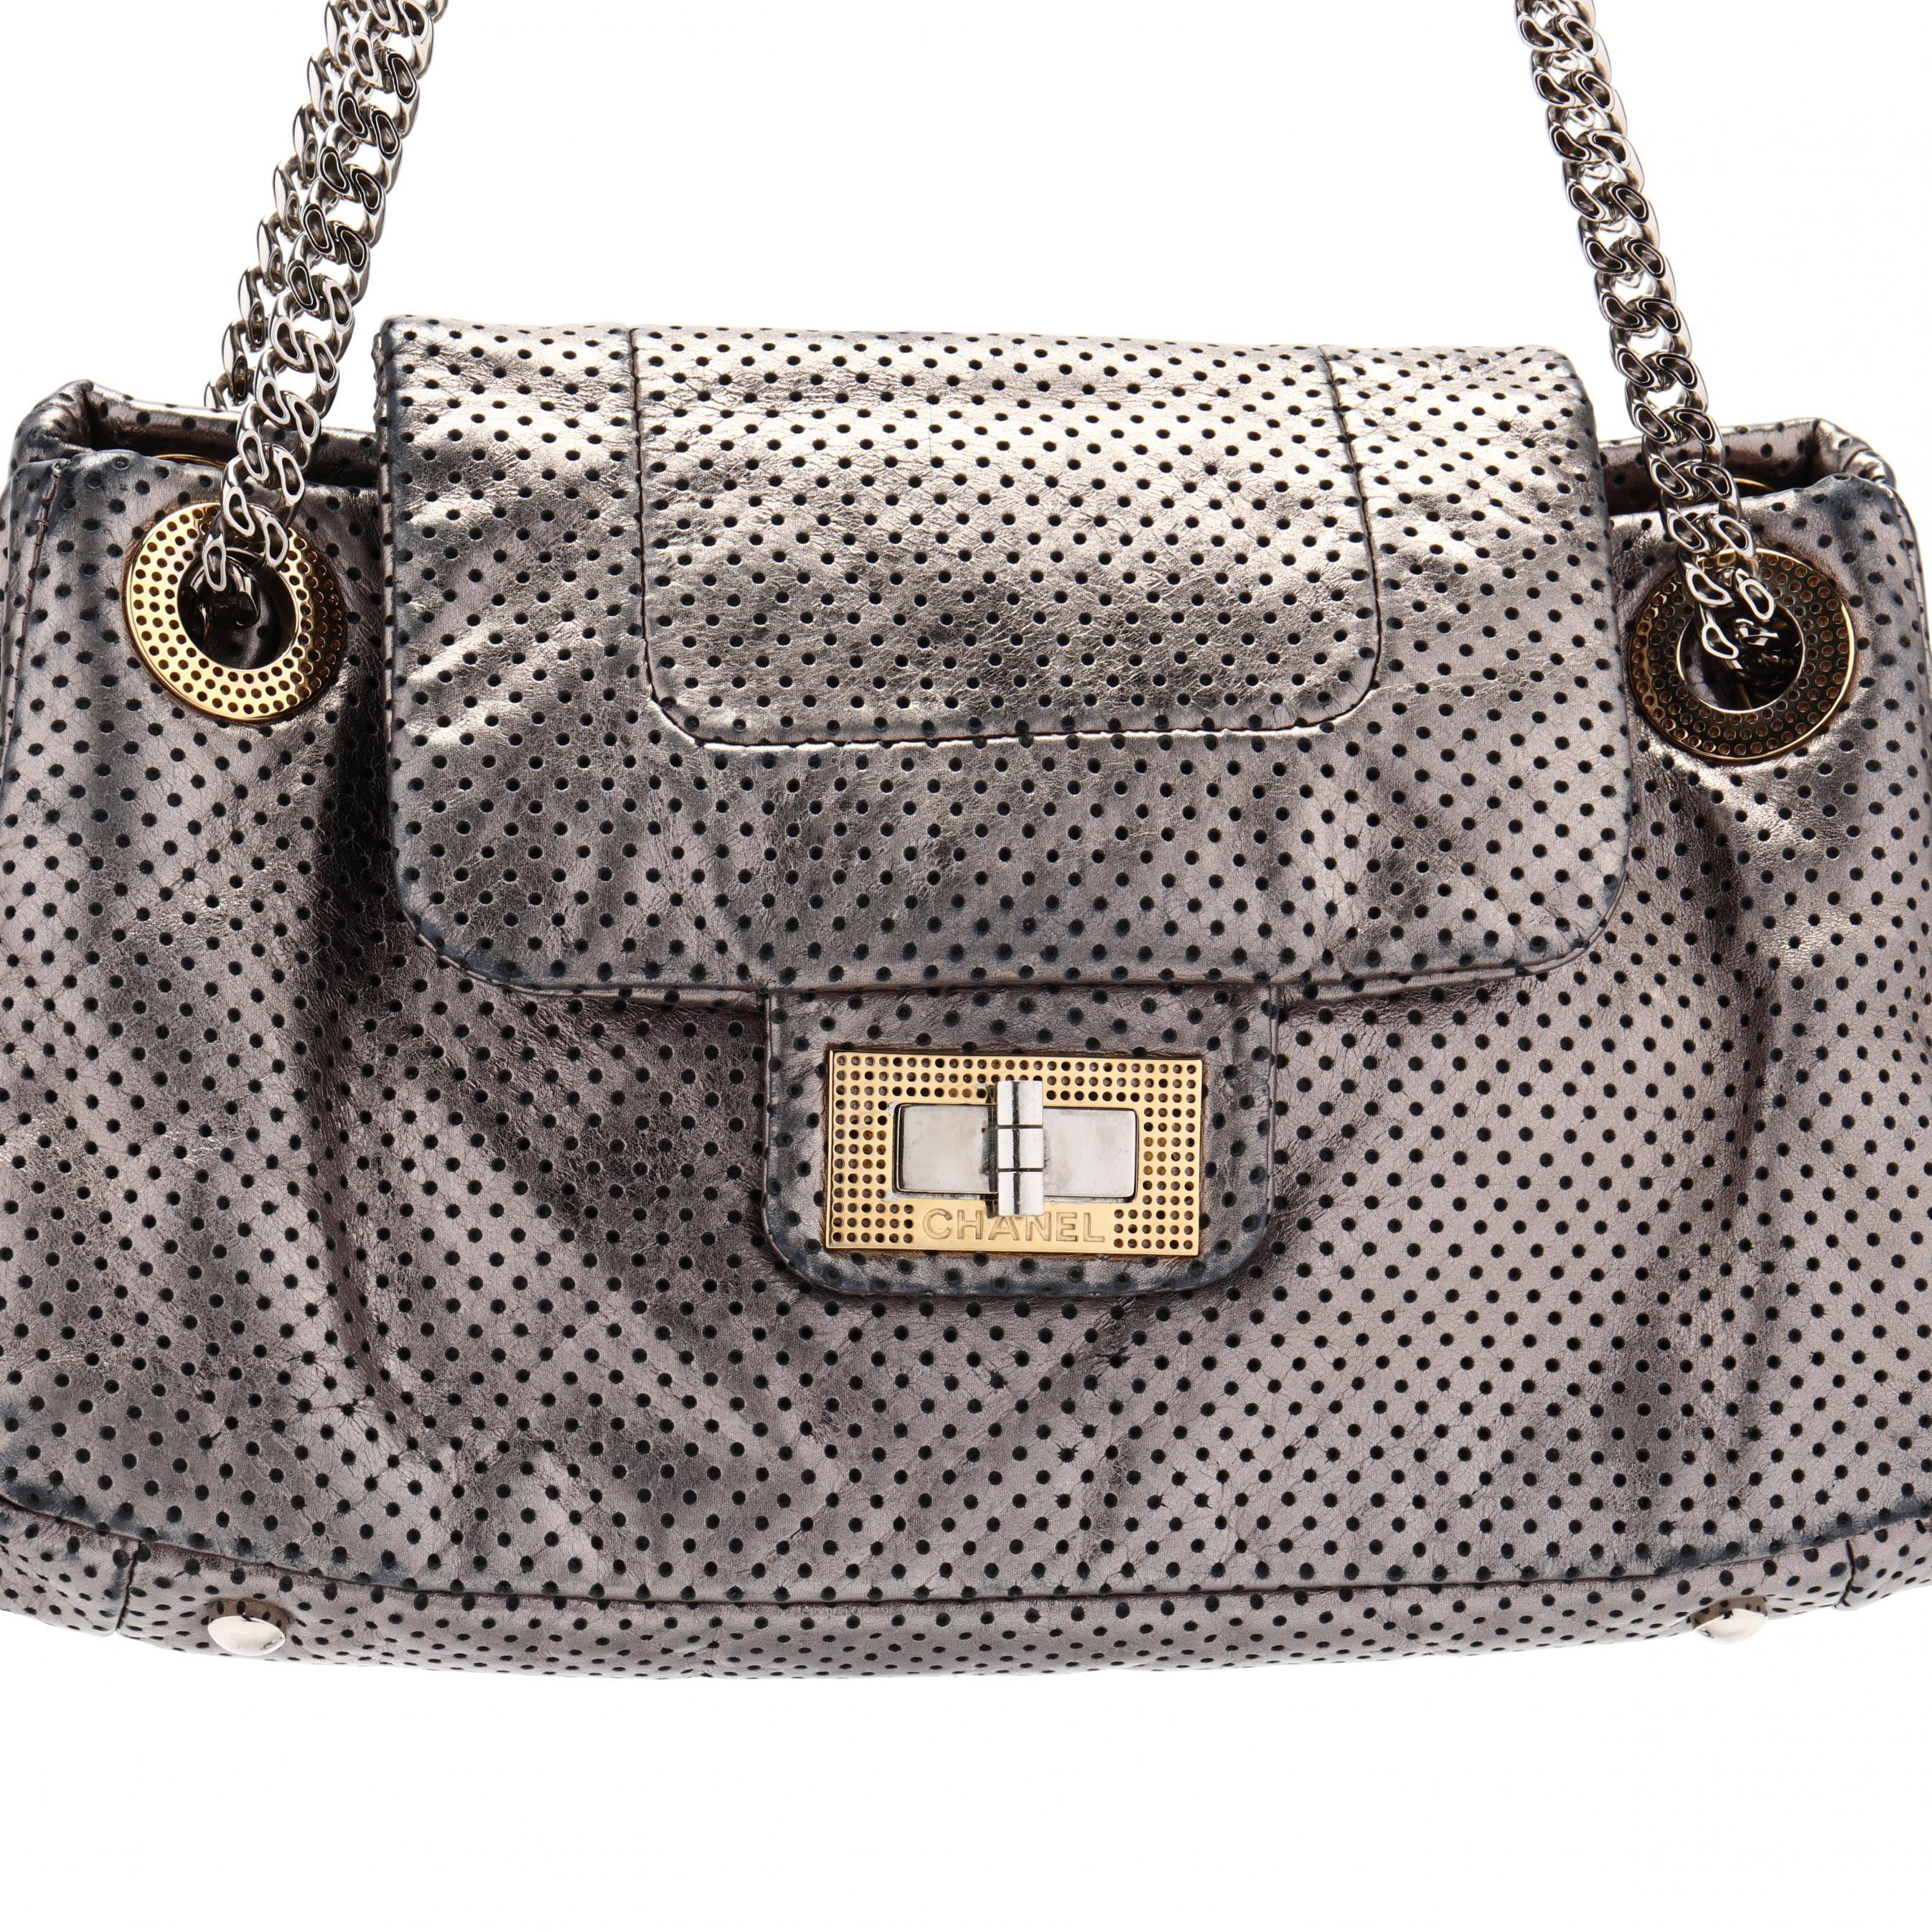 Drill Perforated Metallic Silver Flap Bag, Chanel (Lot 159 - The